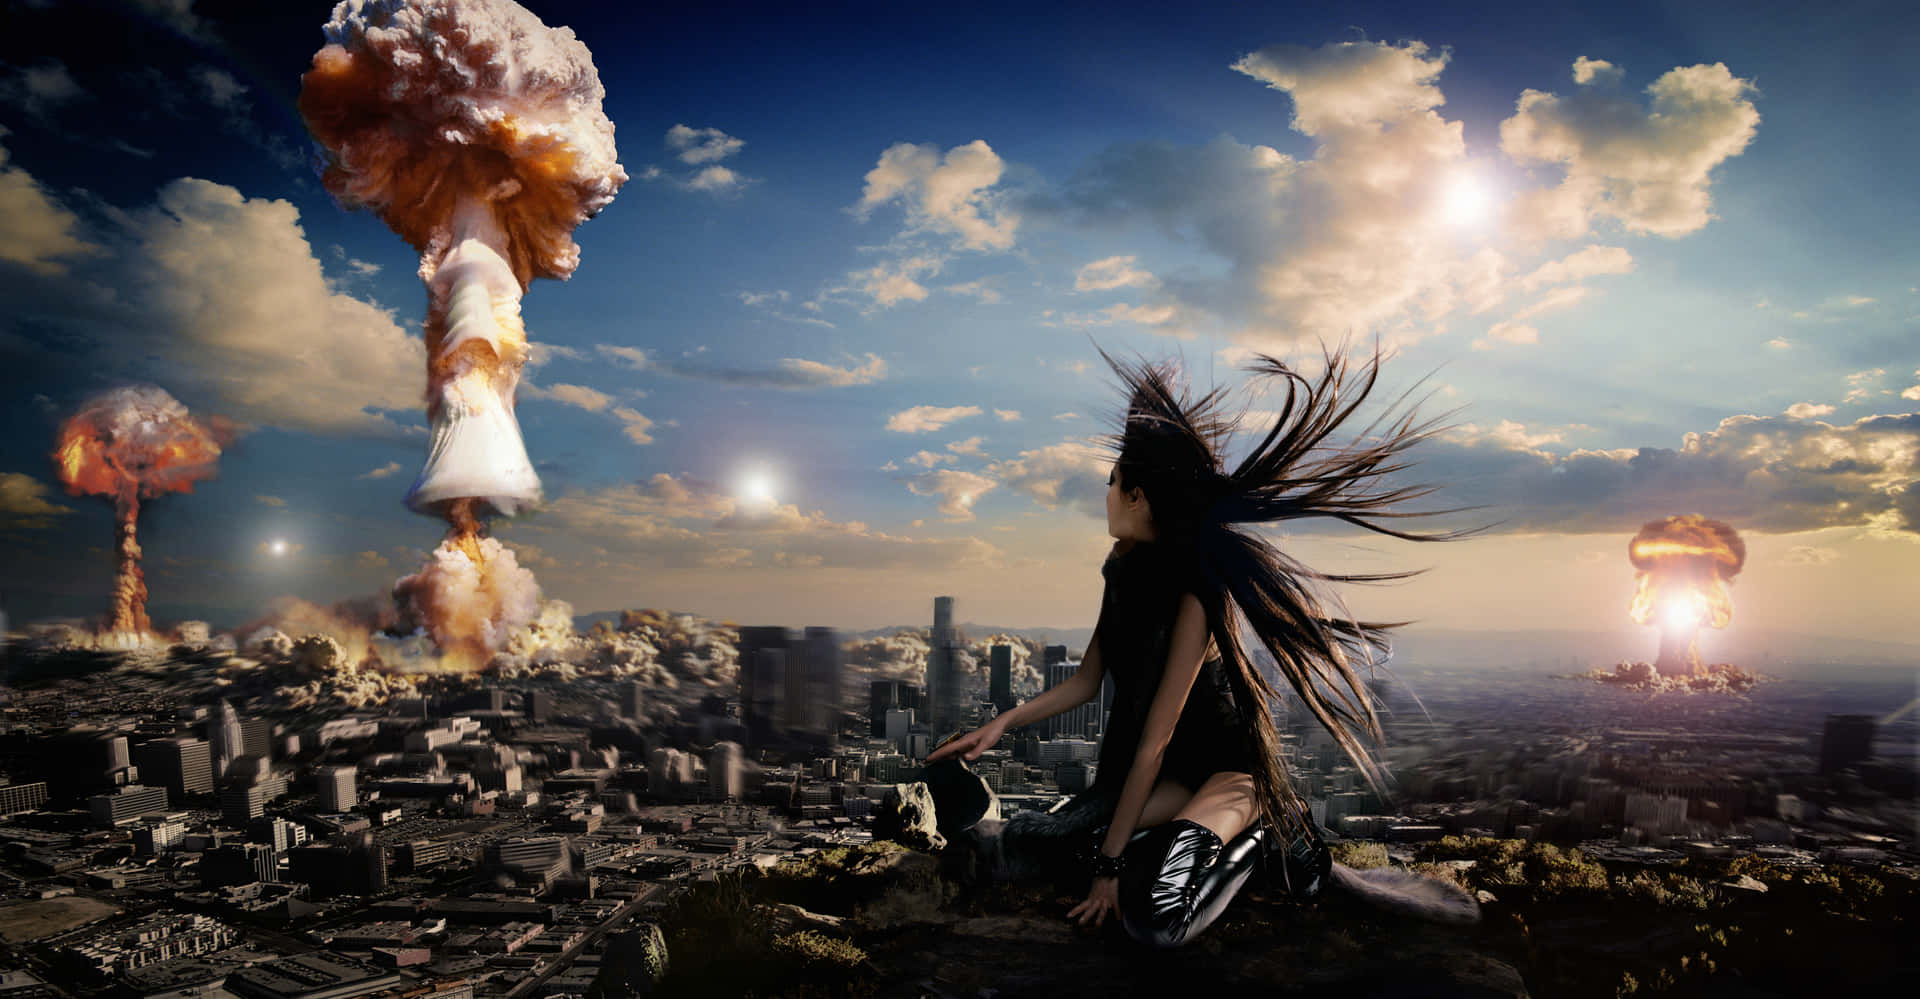 Apocalyptic_ Vision_with_ Observer.jpg Wallpaper